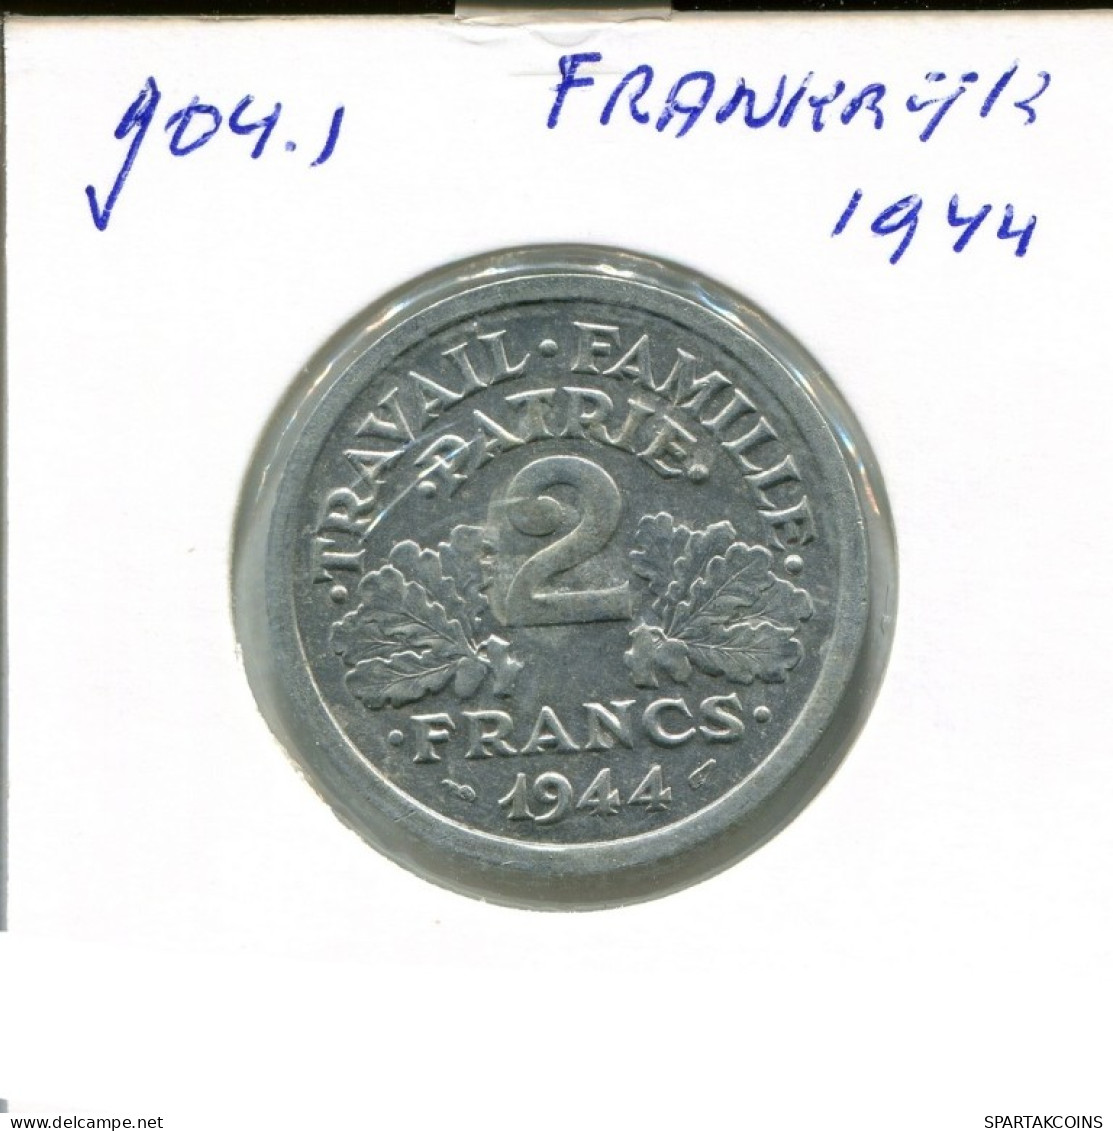 2 FRANCS 1944 FRANCE French Coin #AN349.U.A - 2 Francs